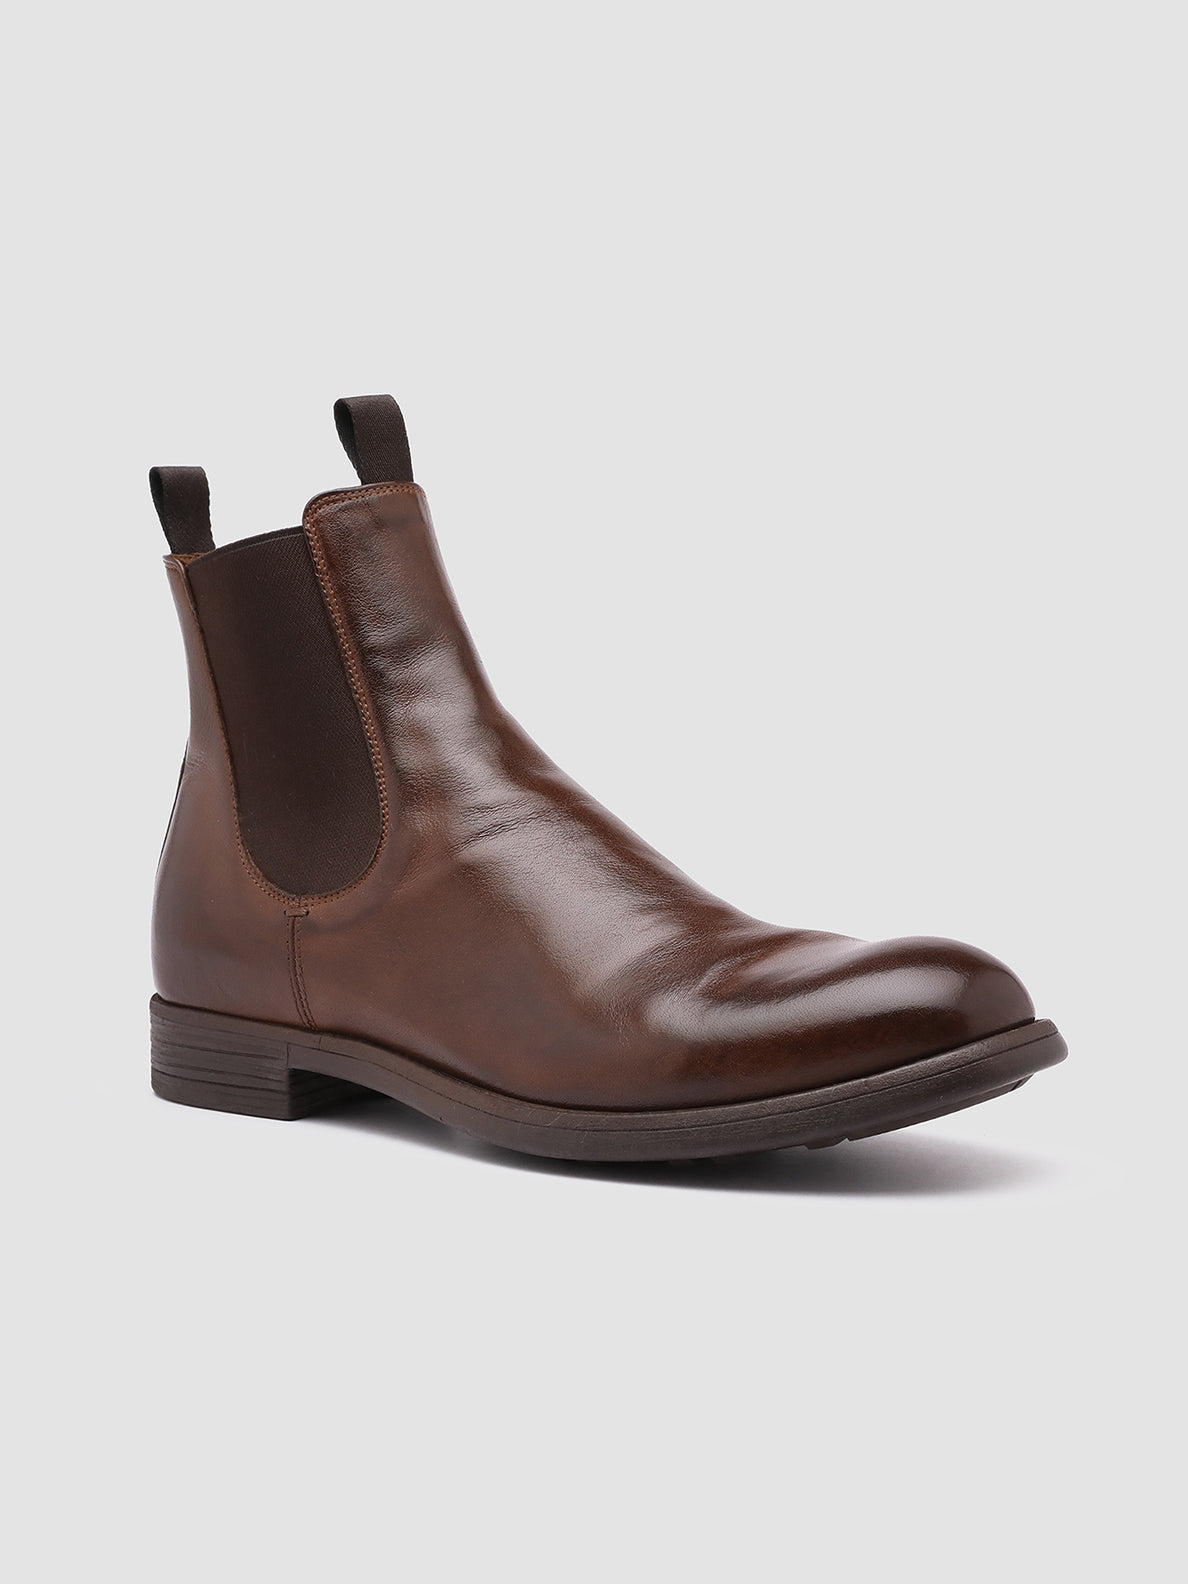 Men's Brown Leather Boots CHRONICLE 002